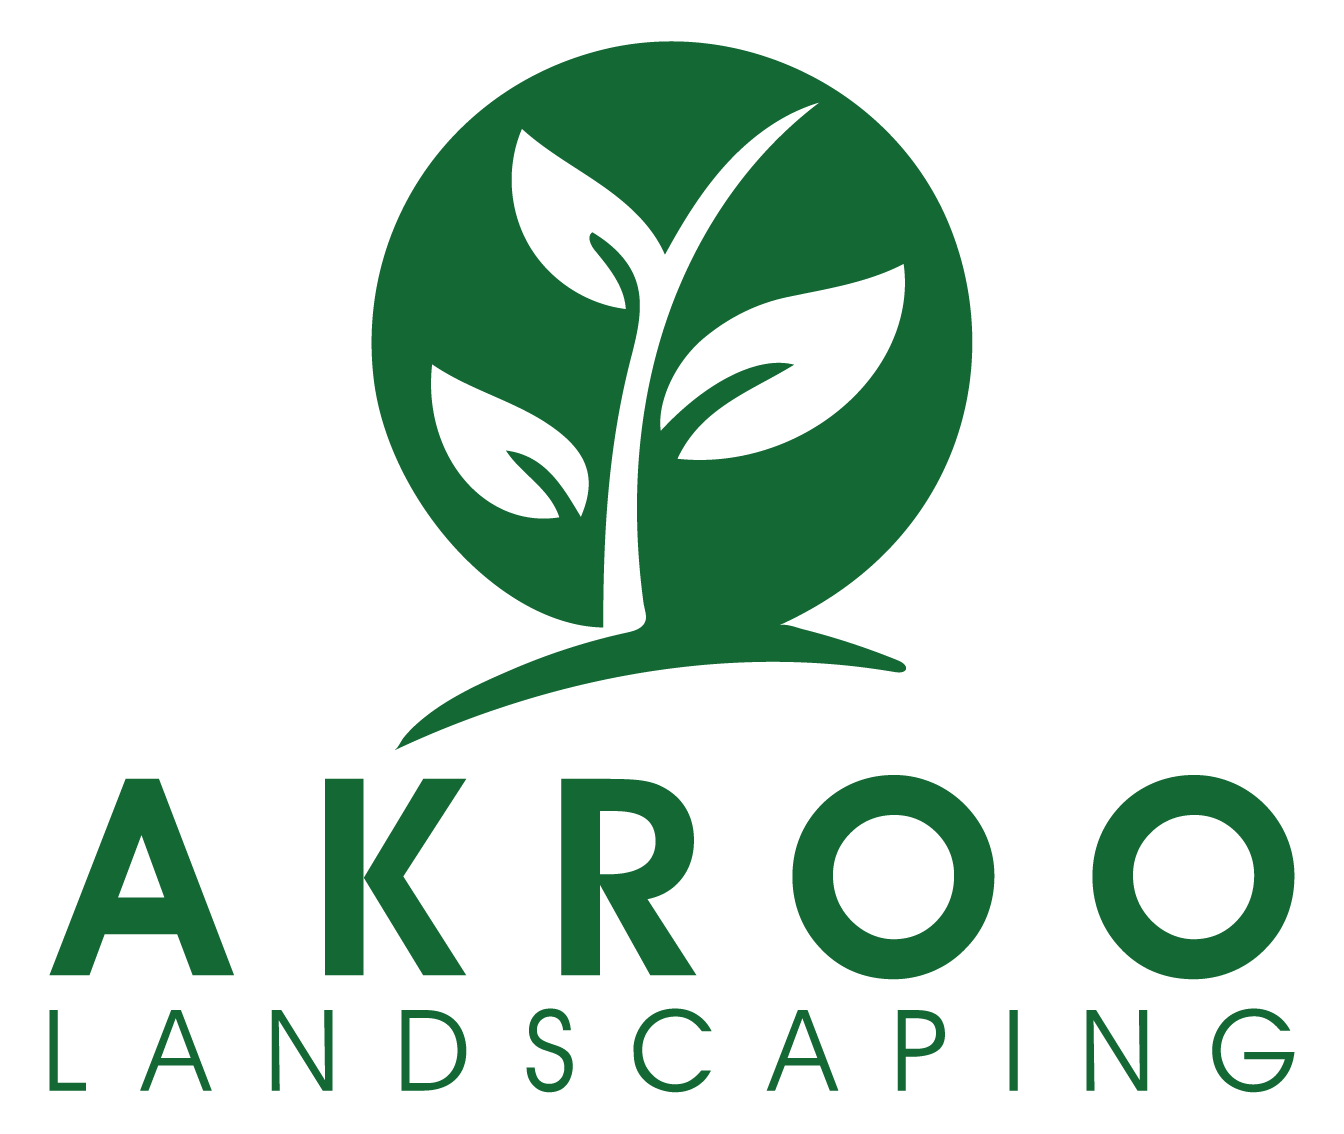 Akroo Landscaping